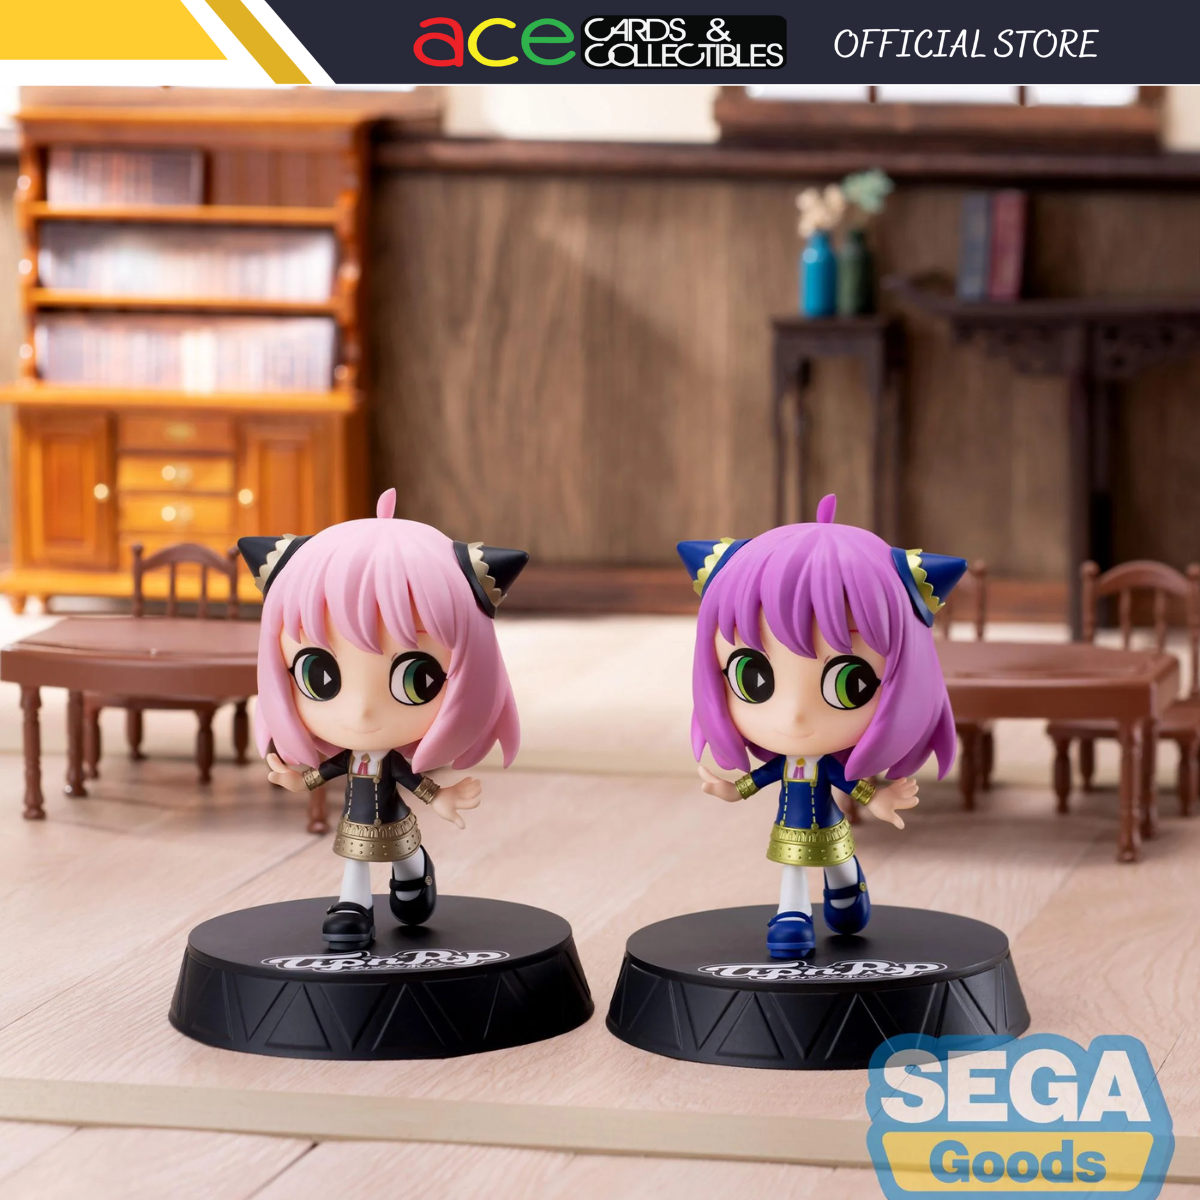 Spy X Family Tip'n'Pop PM Figure "Anya Forger"-Anya Forger-Pink-Sega-Ace Cards & Collectibles